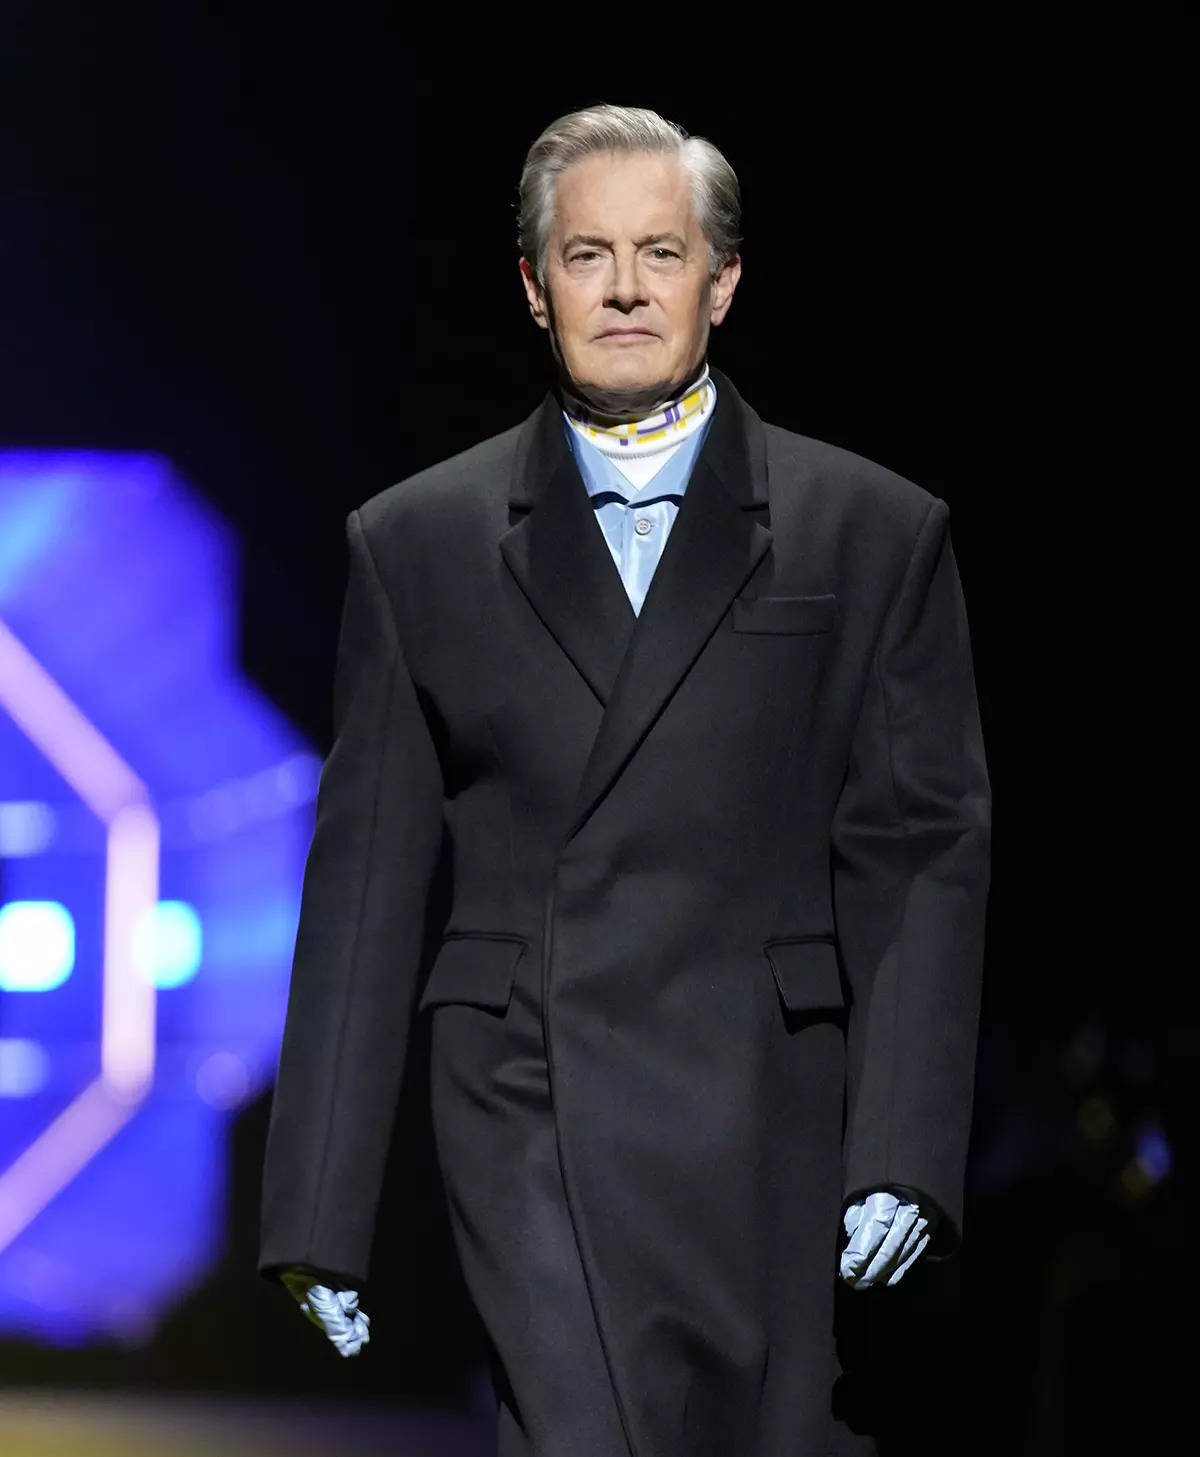 Prada’s Milan Fashion Week 2022 show ends with Jeff Goldblum and Kyle MacLachlan on the ramp